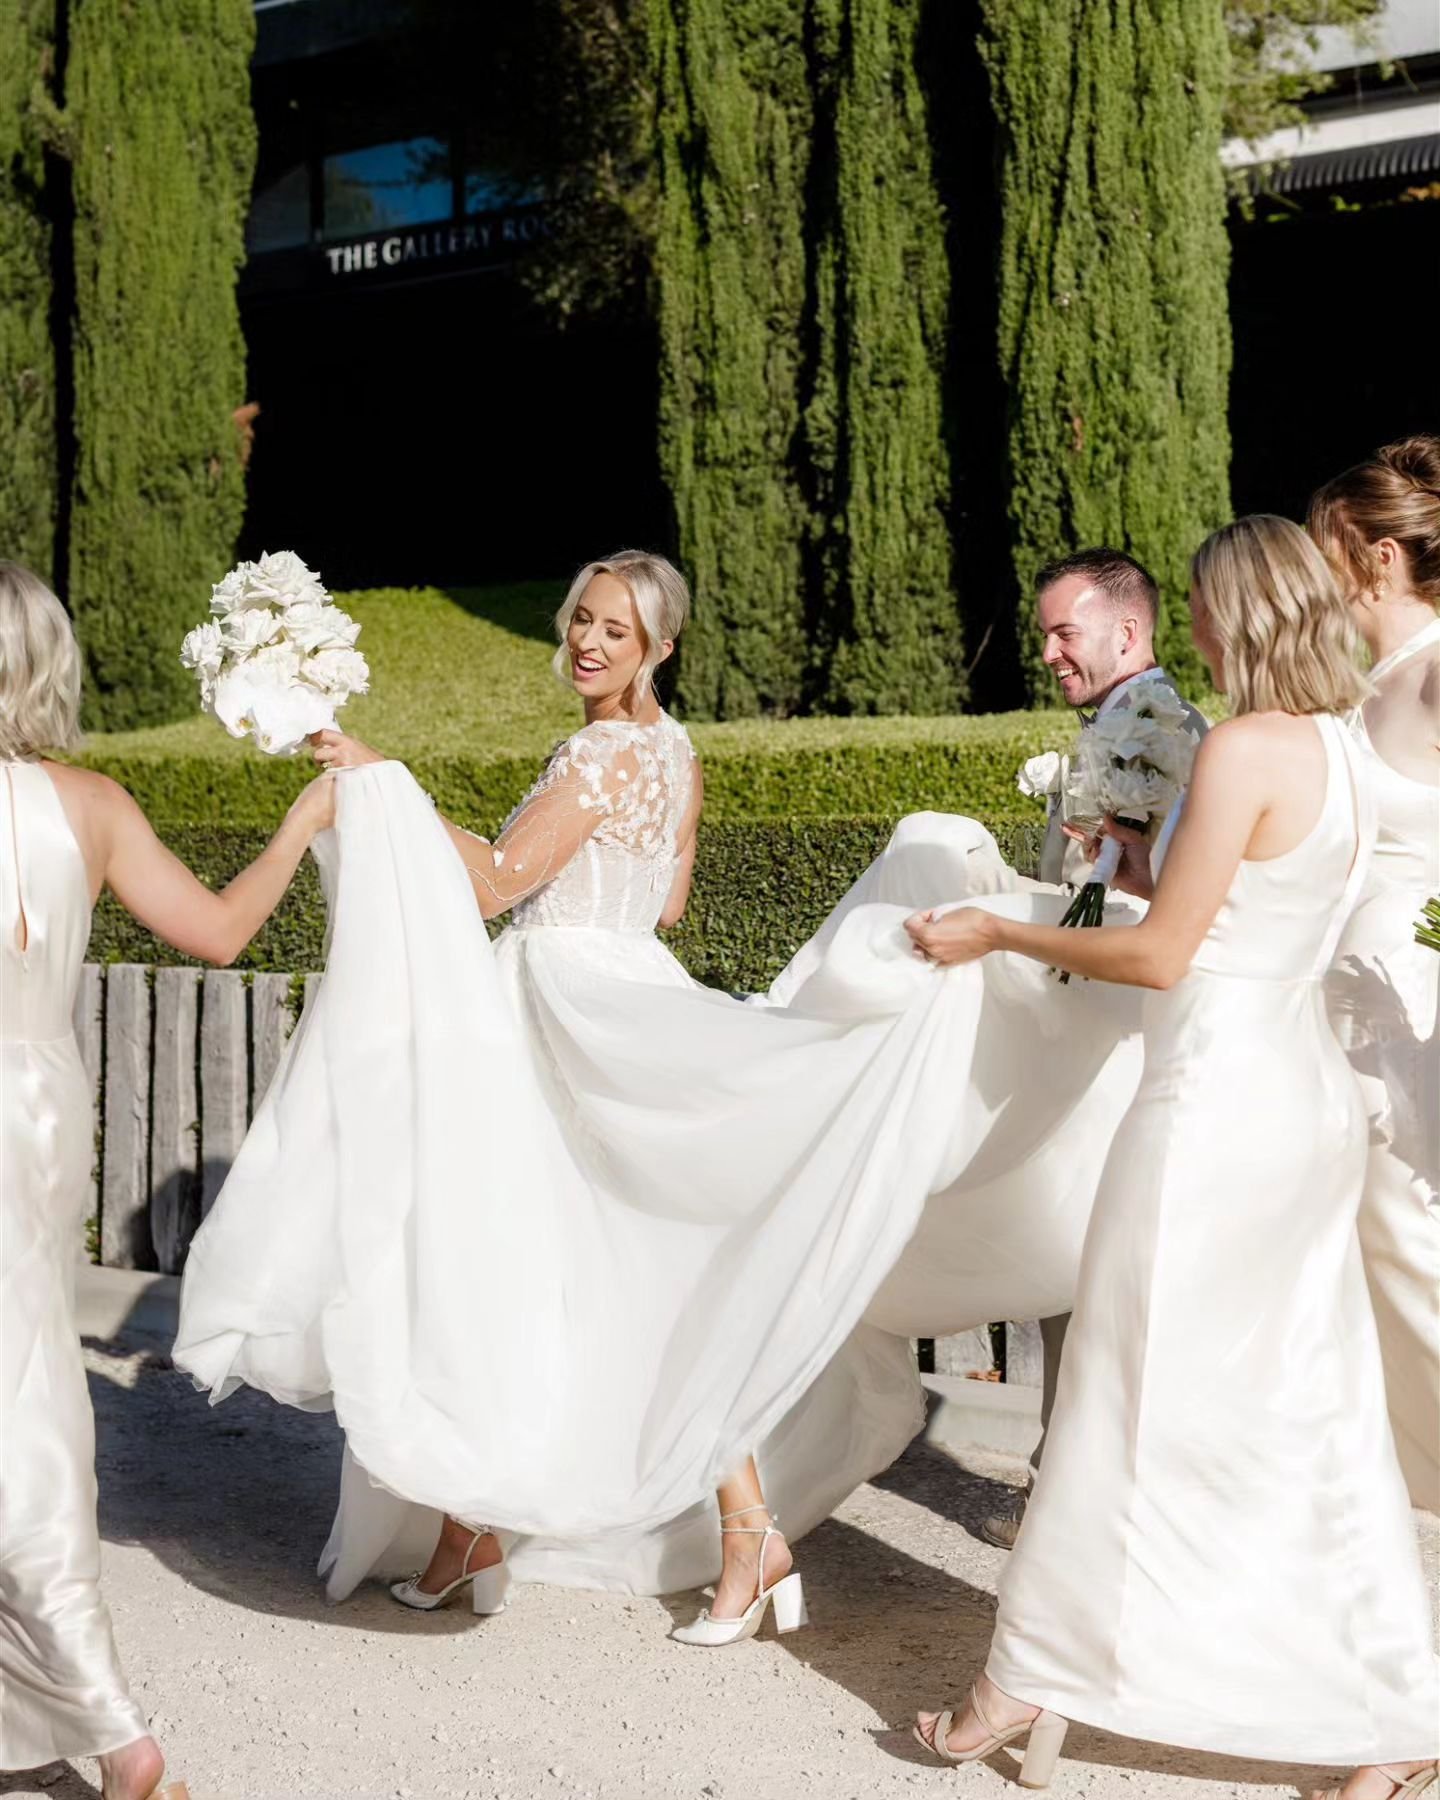 There's nothing like a bride and her tribe! 

Are you tying the knot at these locations?

Lemas Barossa

Kingsford homestead Barossa

Carrick Hill

Maison de moon

Villerica Estate

Mandalay House and garden

Well, I have a special for you! I am offe